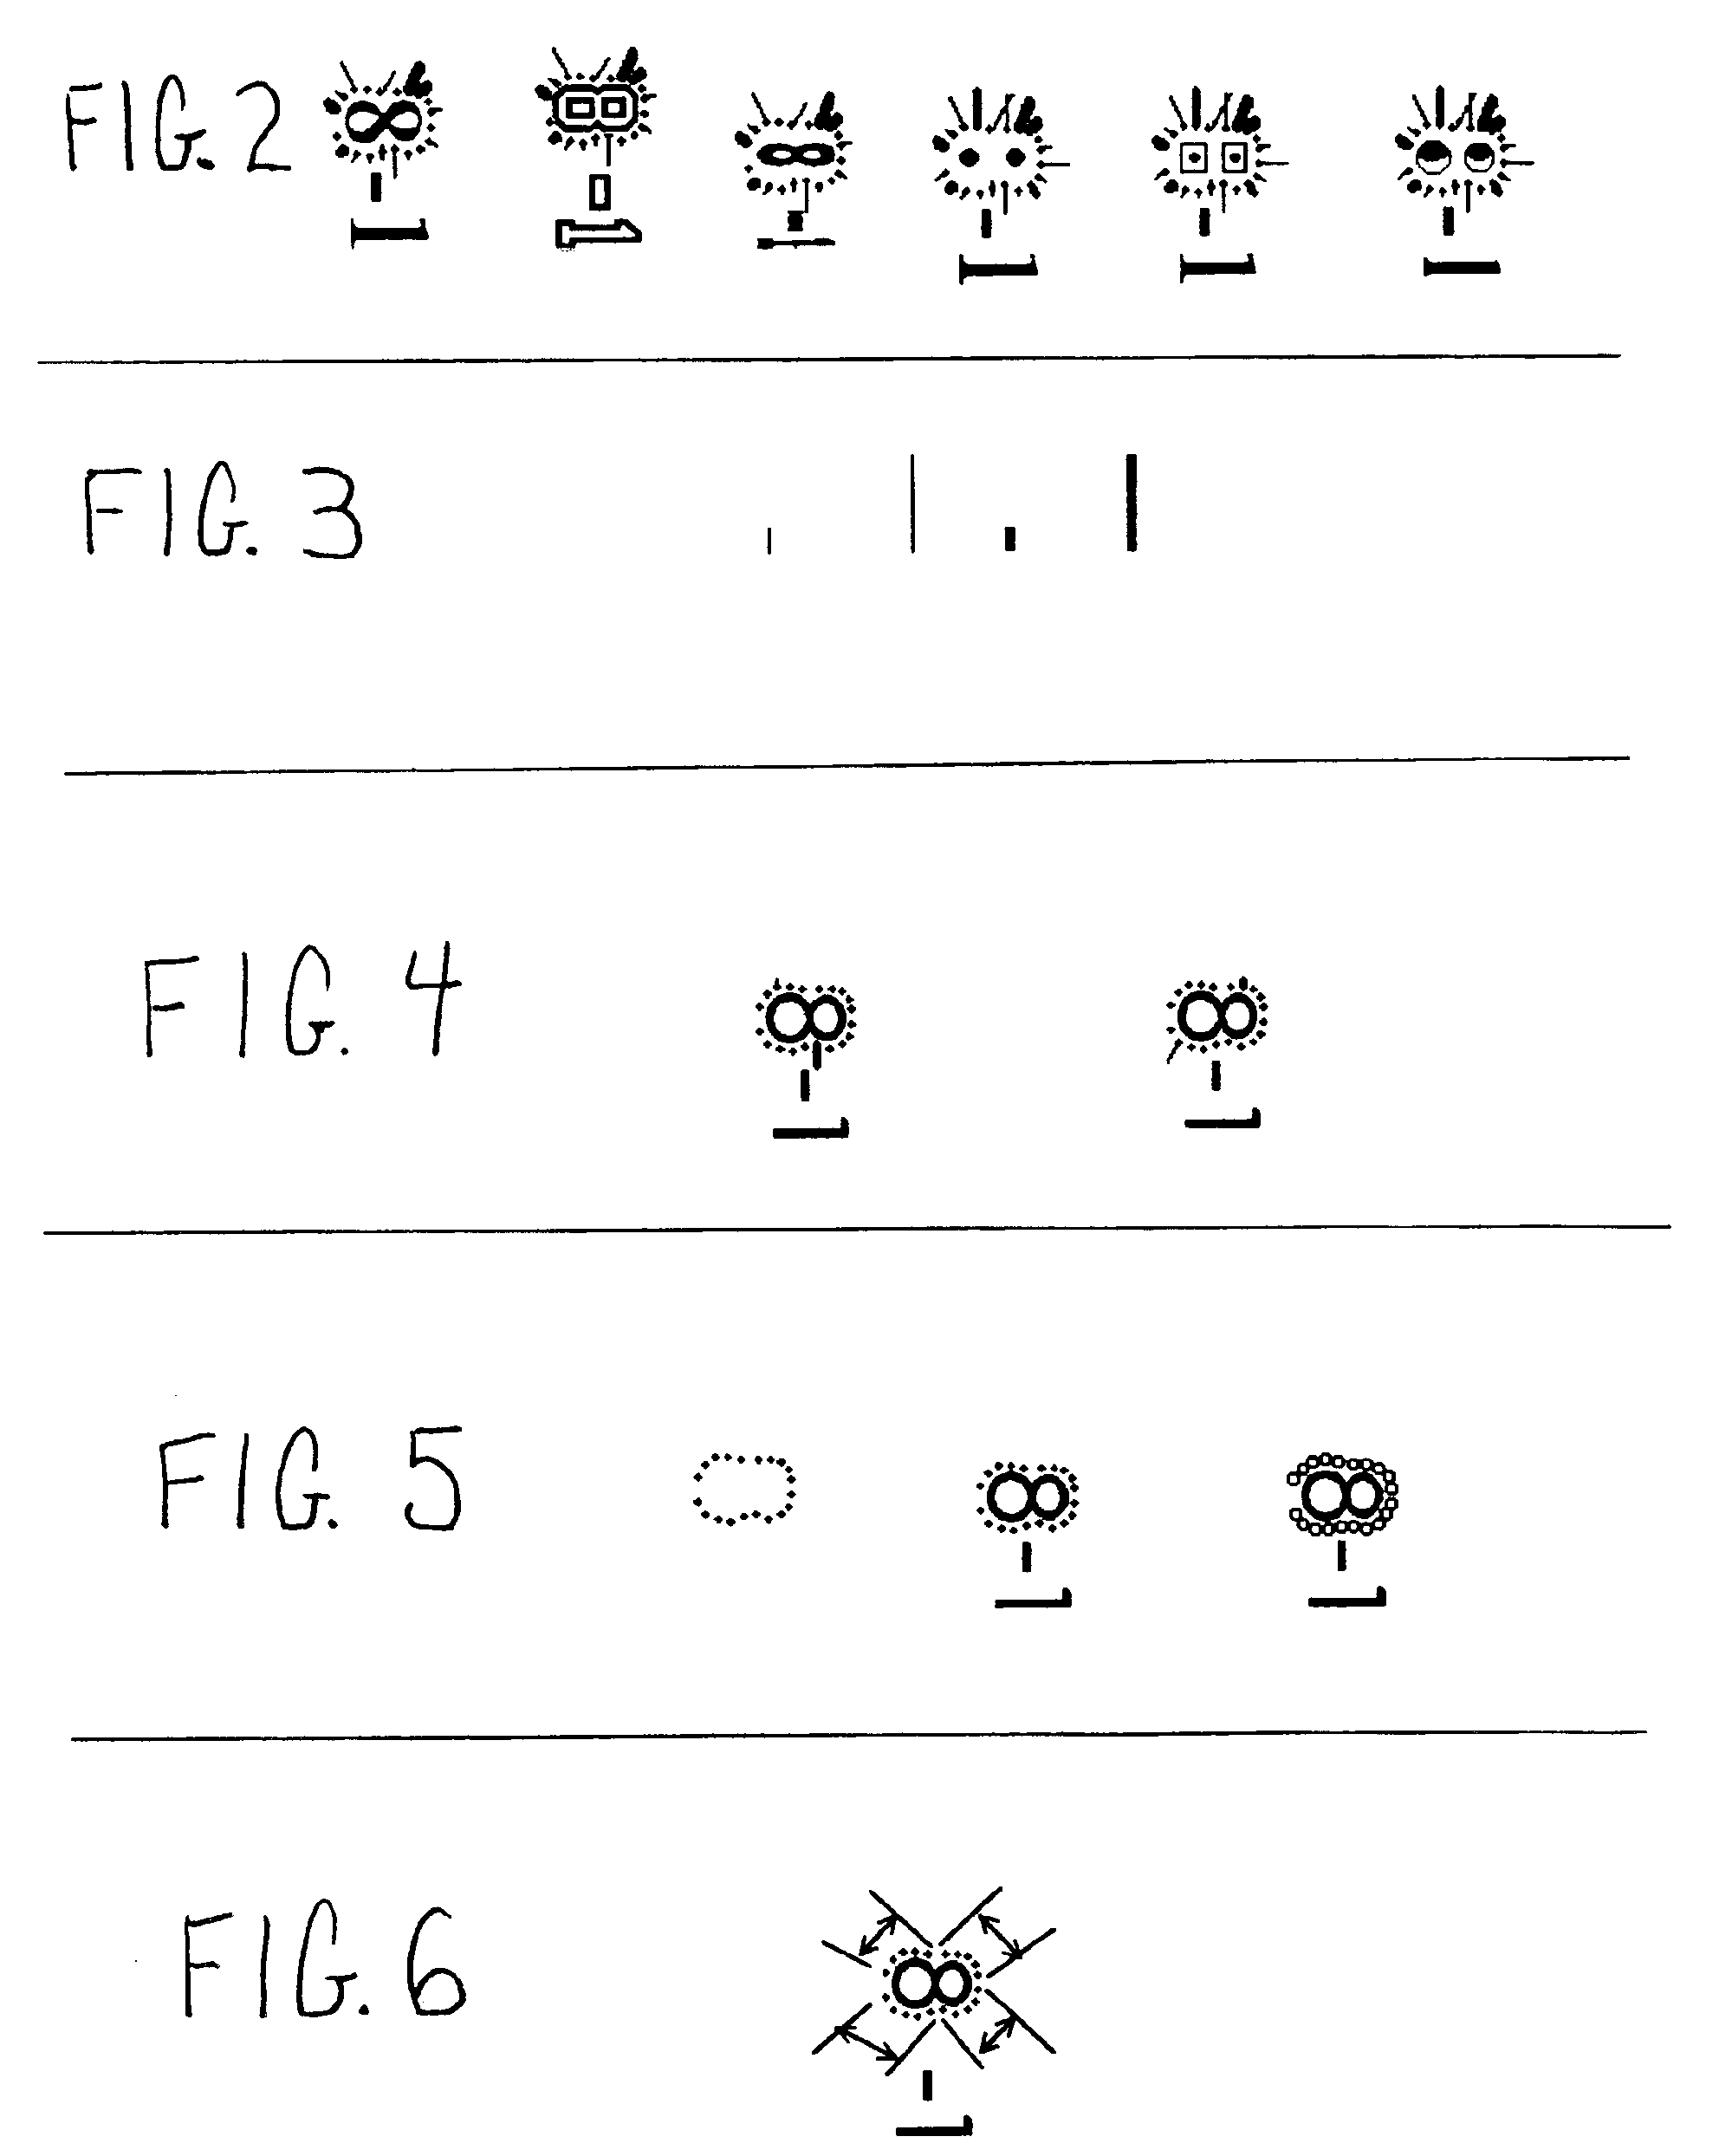 Method, product, and apparatus for requesting a resource from an identifier having a character image